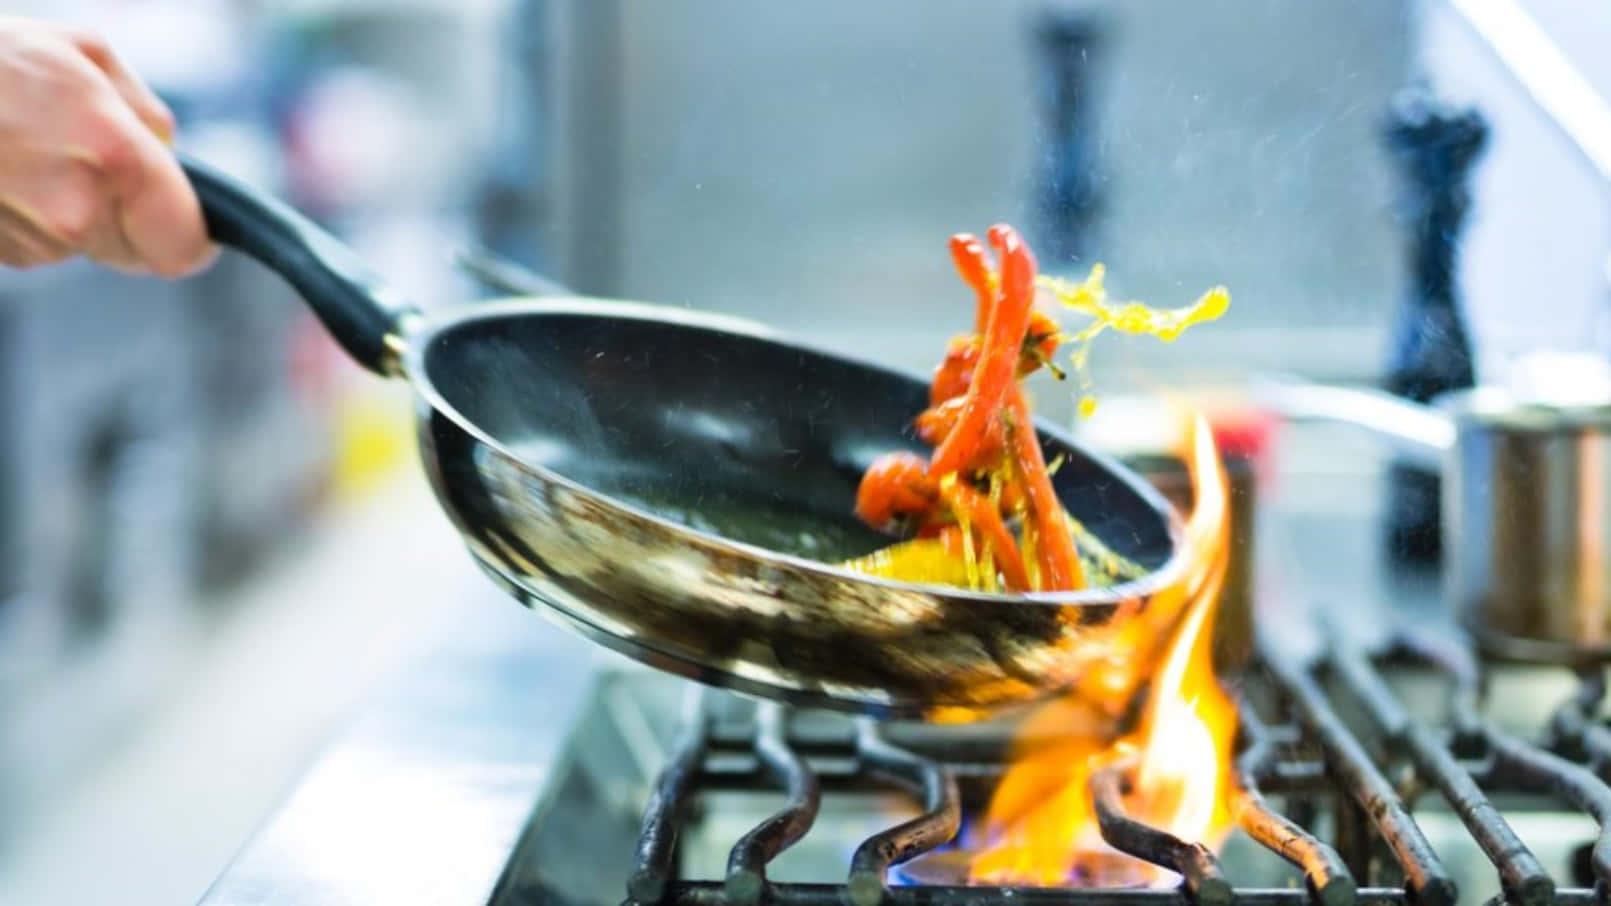 A Person Is Frying Food On A Stove